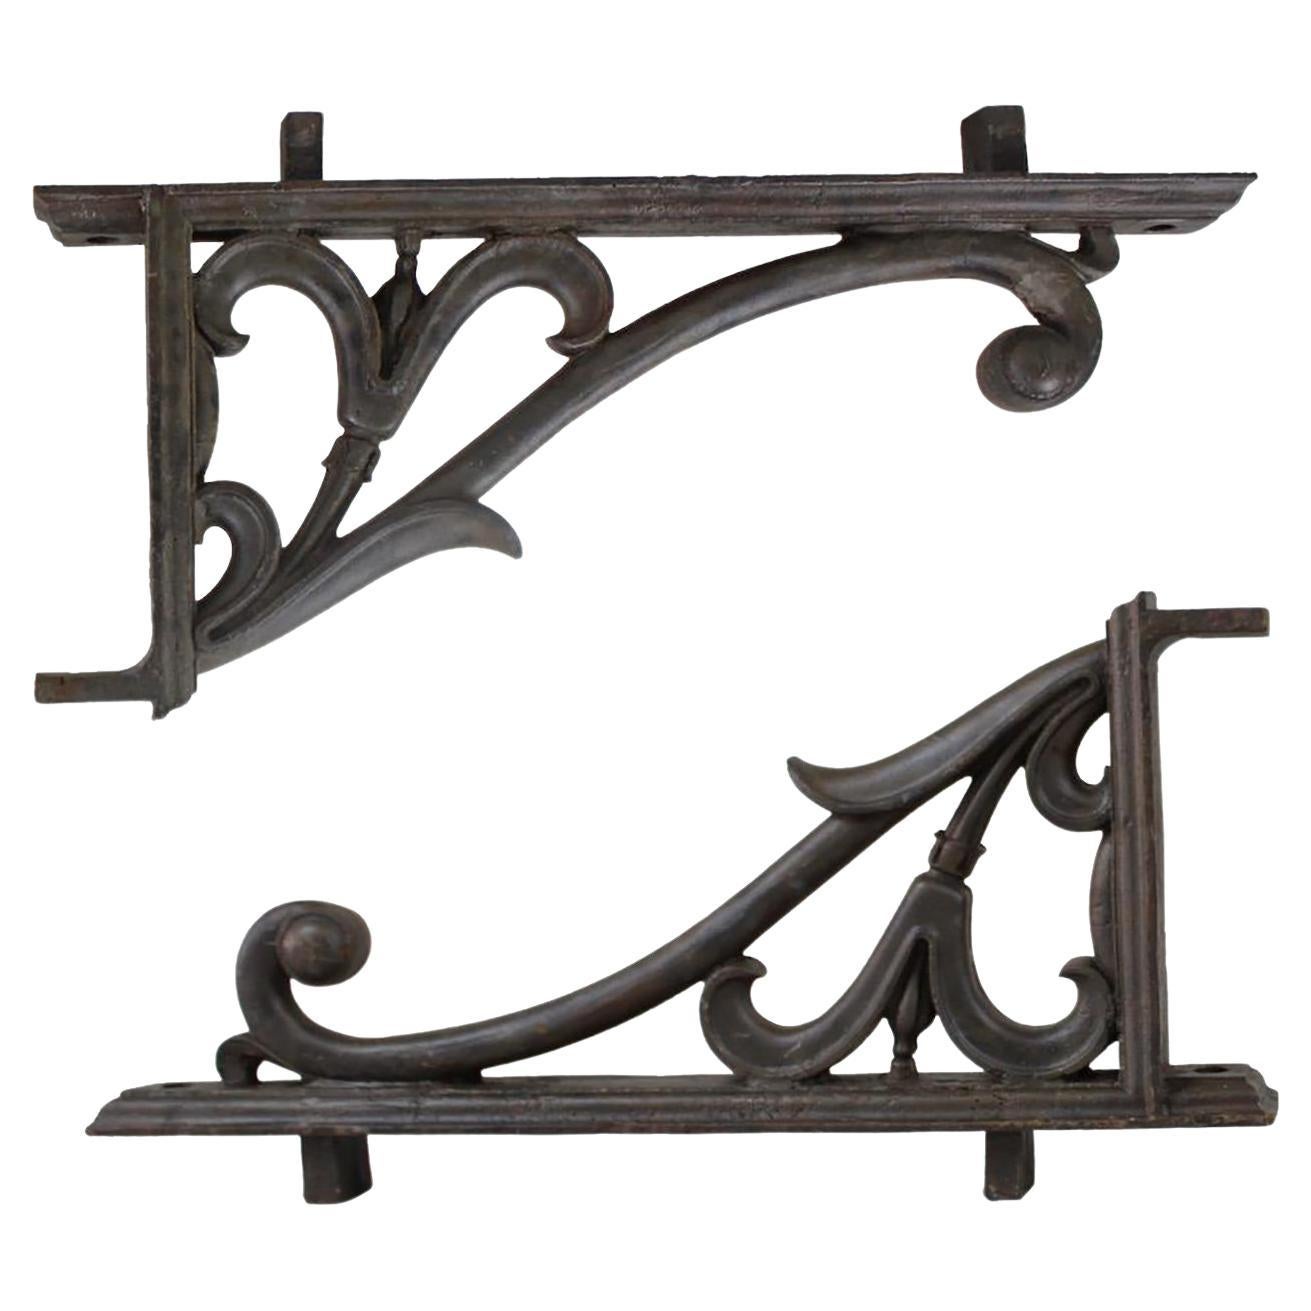 Pair of Mid-19th Century Greek Revival Cast Iron Scrolled Balcony Brackets